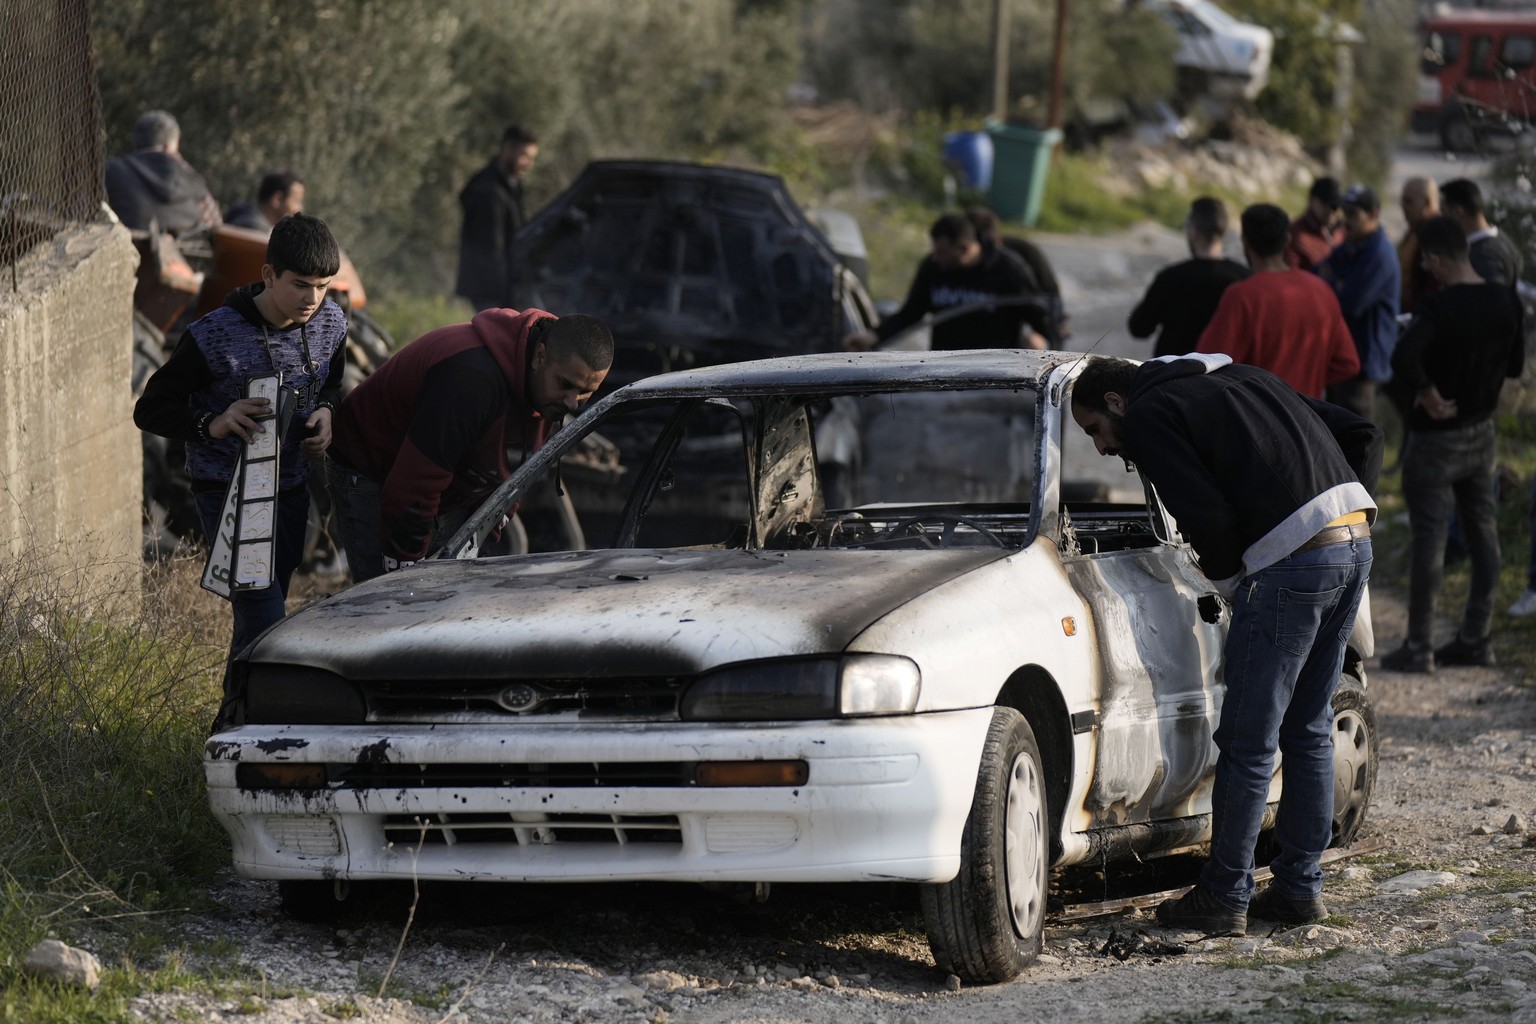 Palestinians inspect a burnt car, which residents say was set on fire by Israeli settlers, in Burin village near the West Bank city of Nablus, Saturday, Feb. 25, 2023. Palestinian officials say settle ...